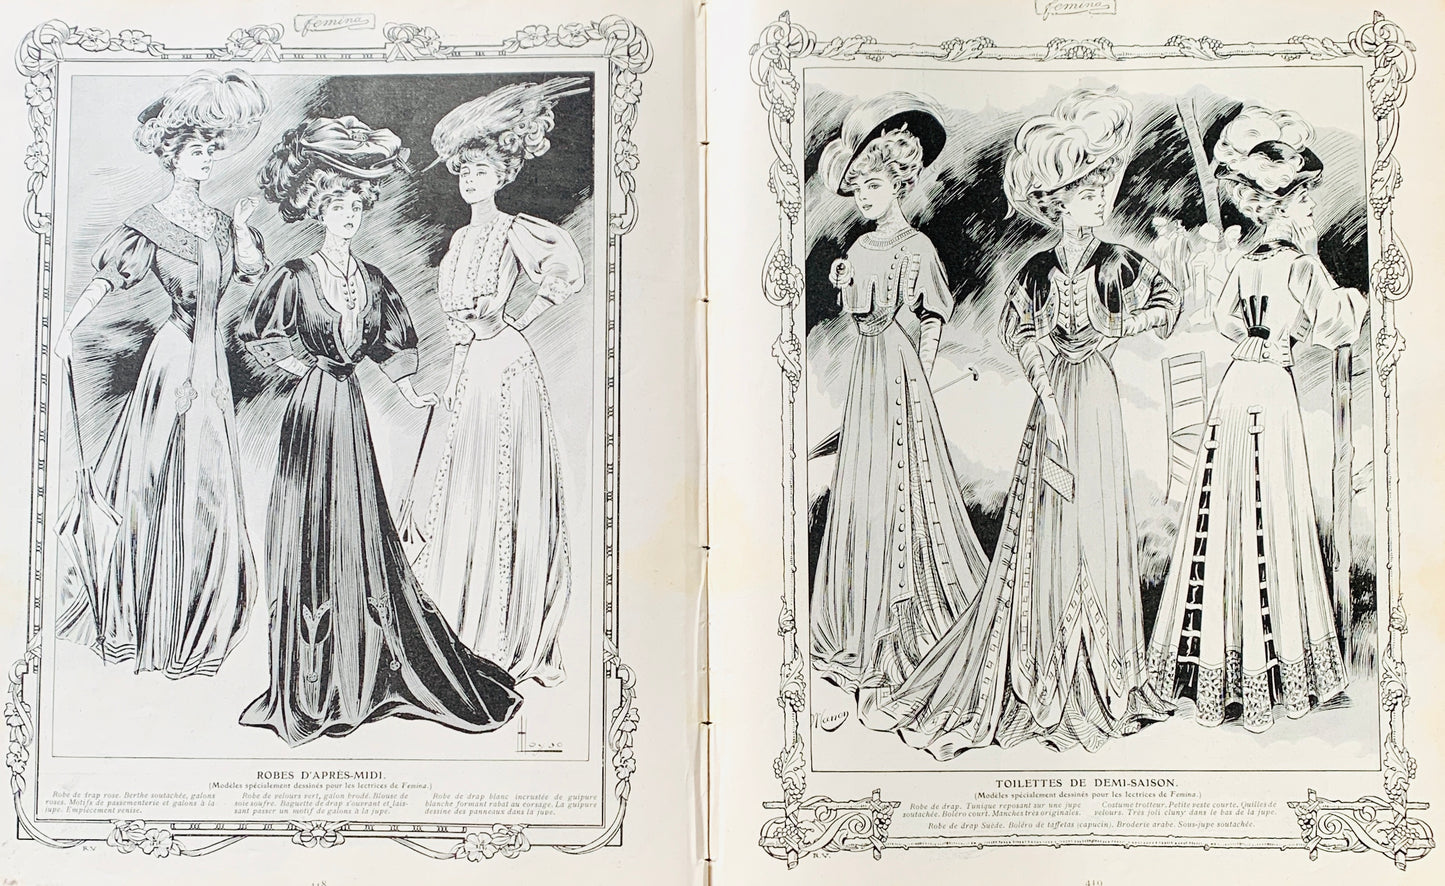 September 1906 French Magazine FEMINA Lots of Gorgeous Illustrations and Adverts including 3 Full Page Colour Portraits.